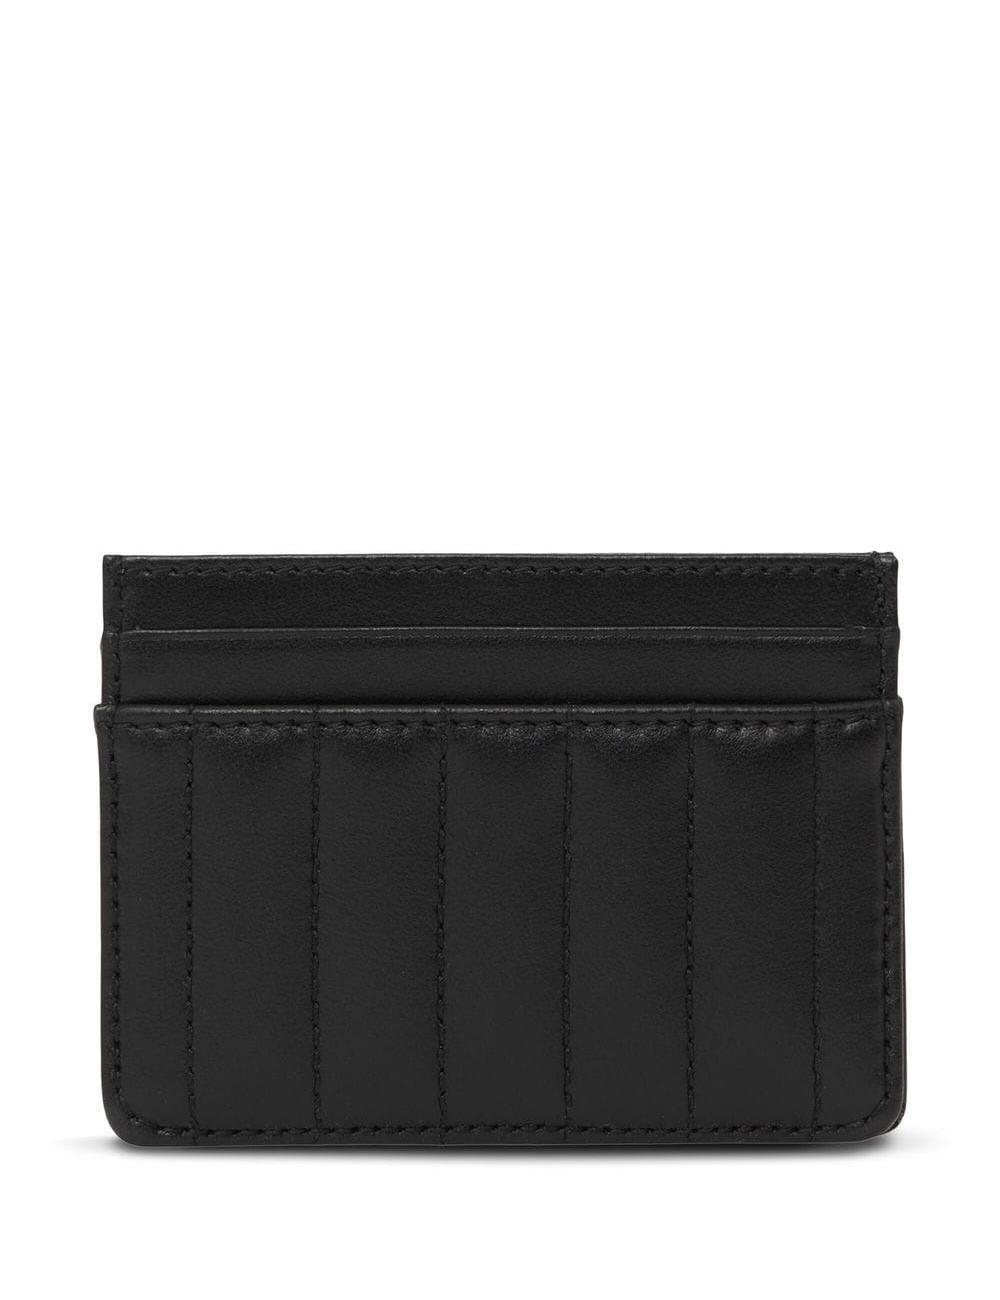 additional production Quilted Leather Lola Card Case